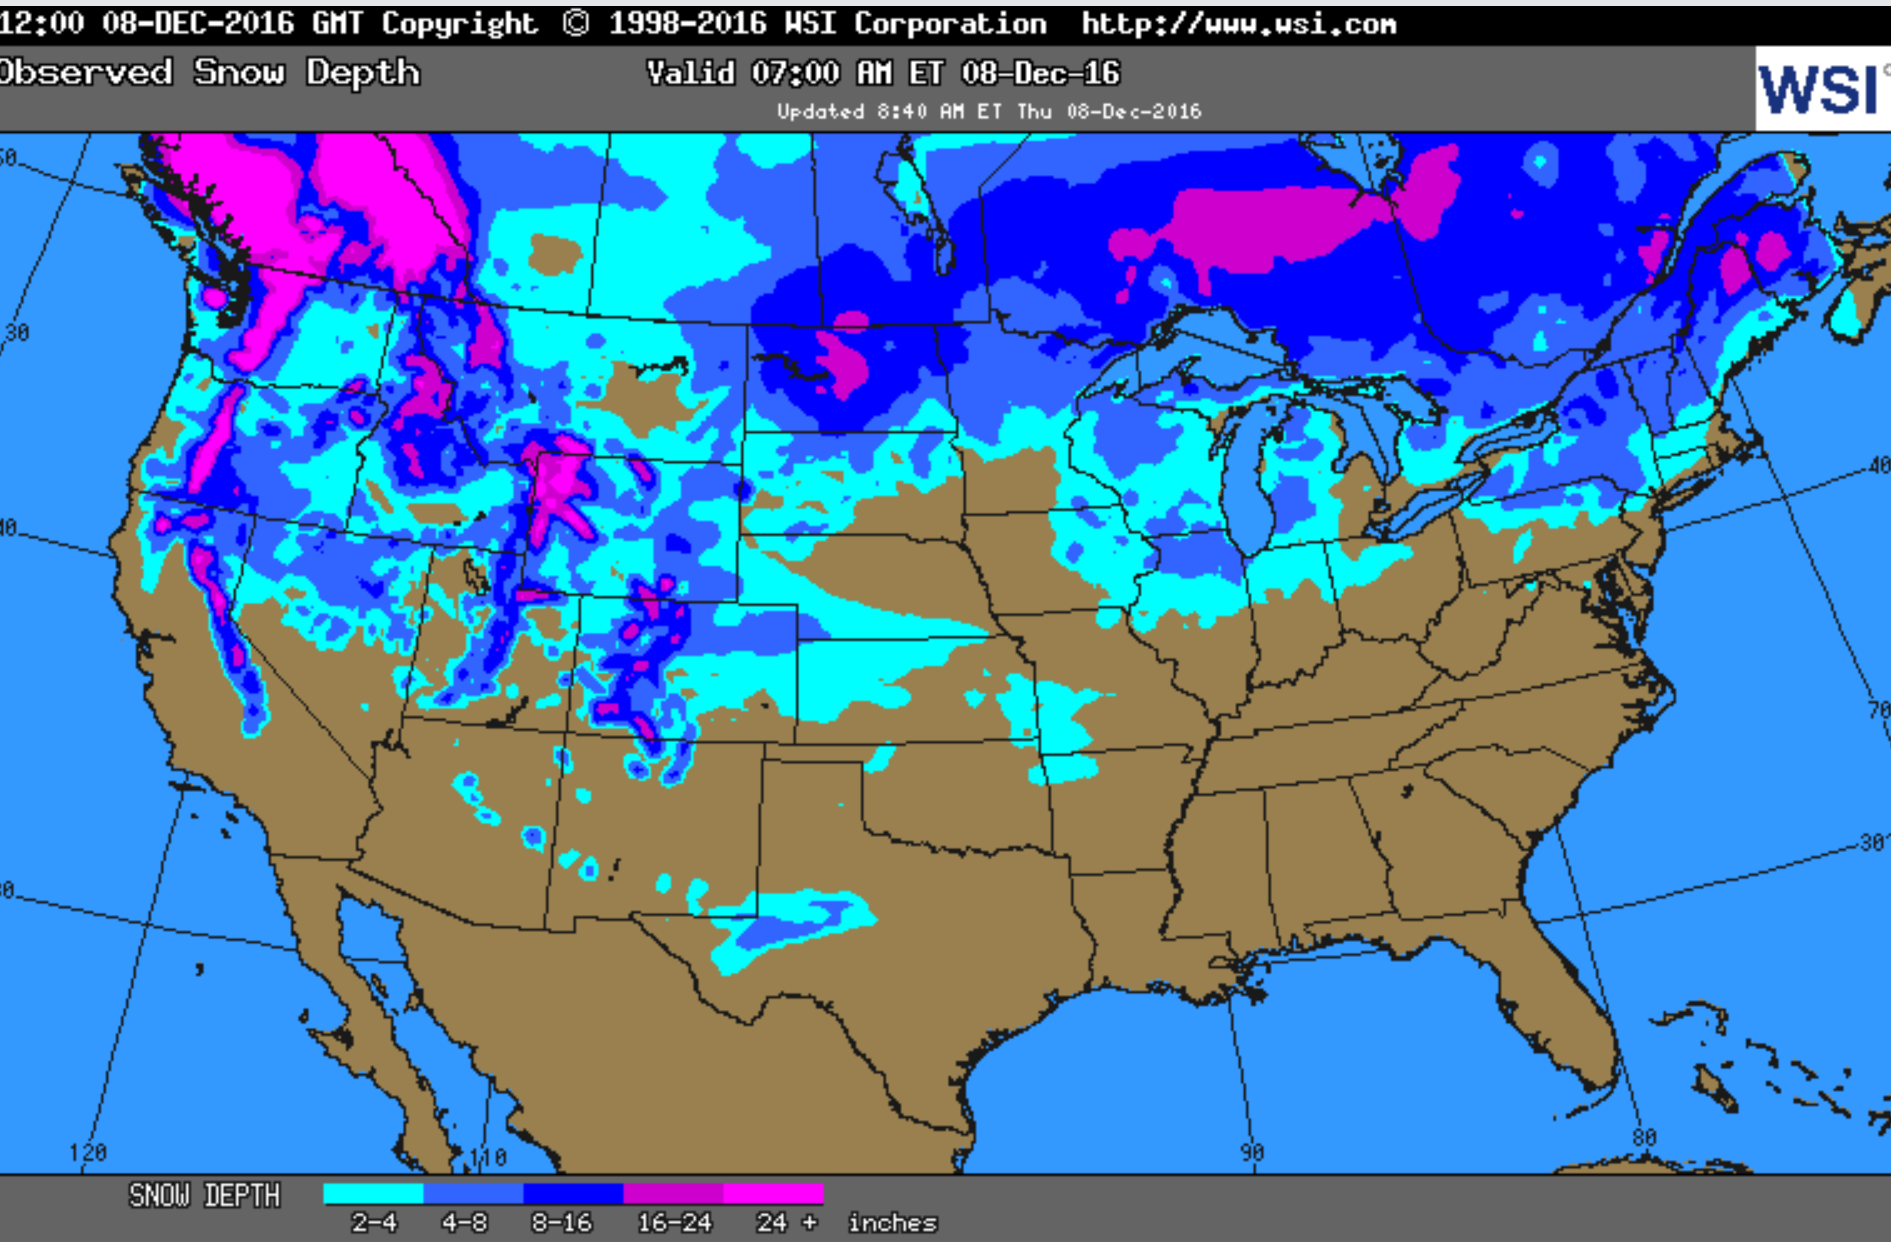 Current Snowcover Map! The West and PNW is looking GOOD! Image: Intellicast 